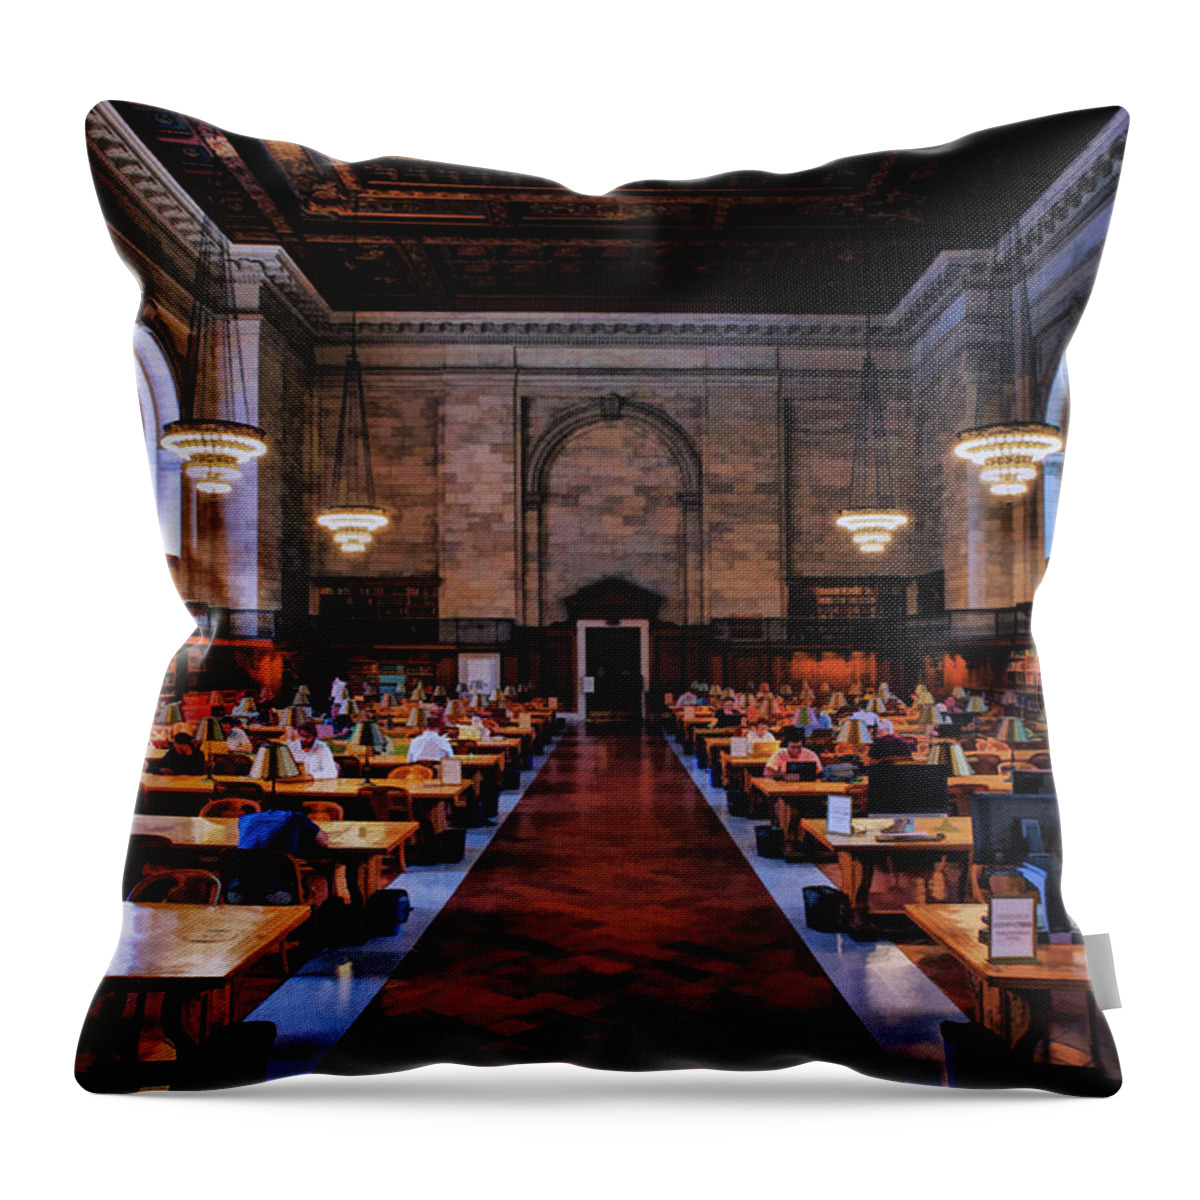 New York Throw Pillow featuring the painting New York City Public Library Rose Reading Room by Christopher Arndt